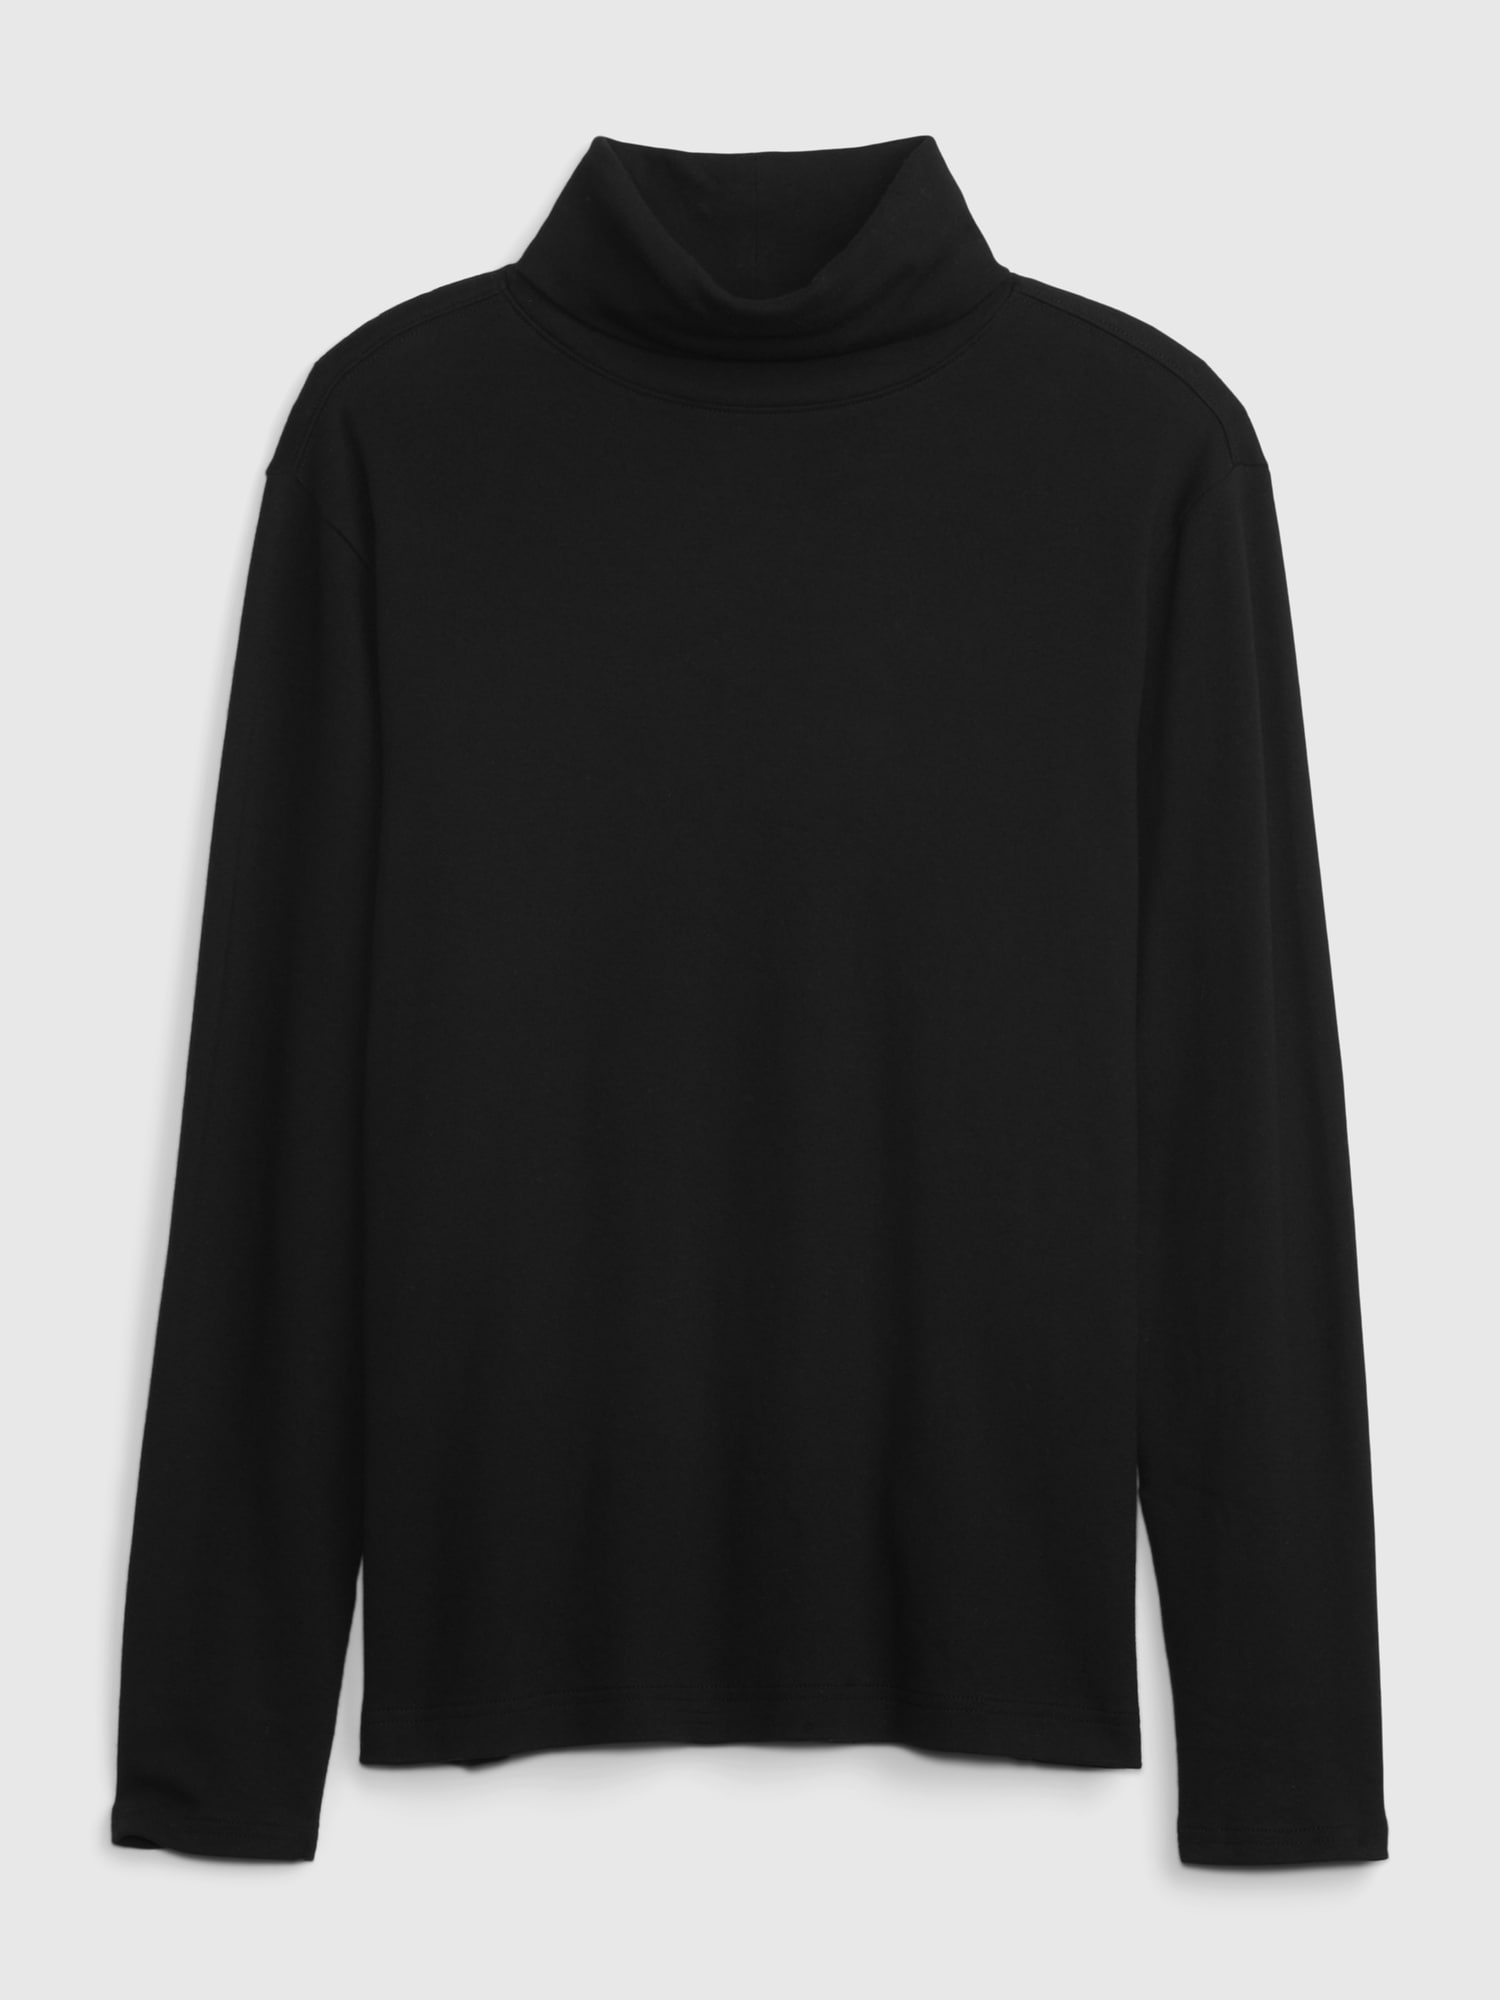 picture of turtle neck shirt Cheap Sale - OFF 66%